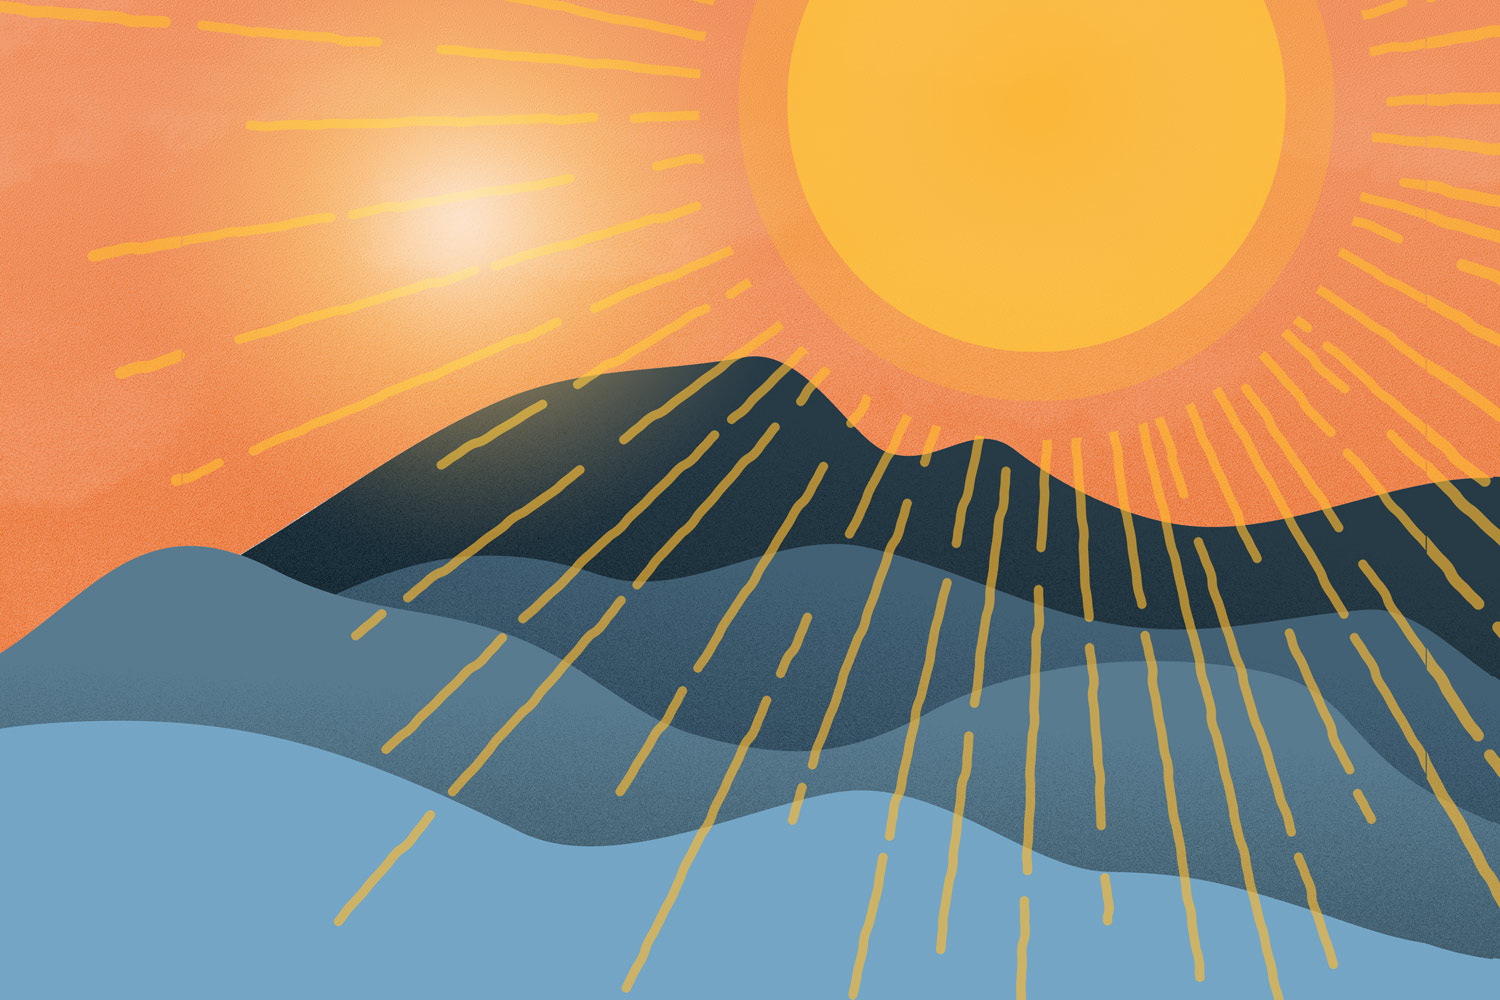 Illustration of a sun peaking over the mountains